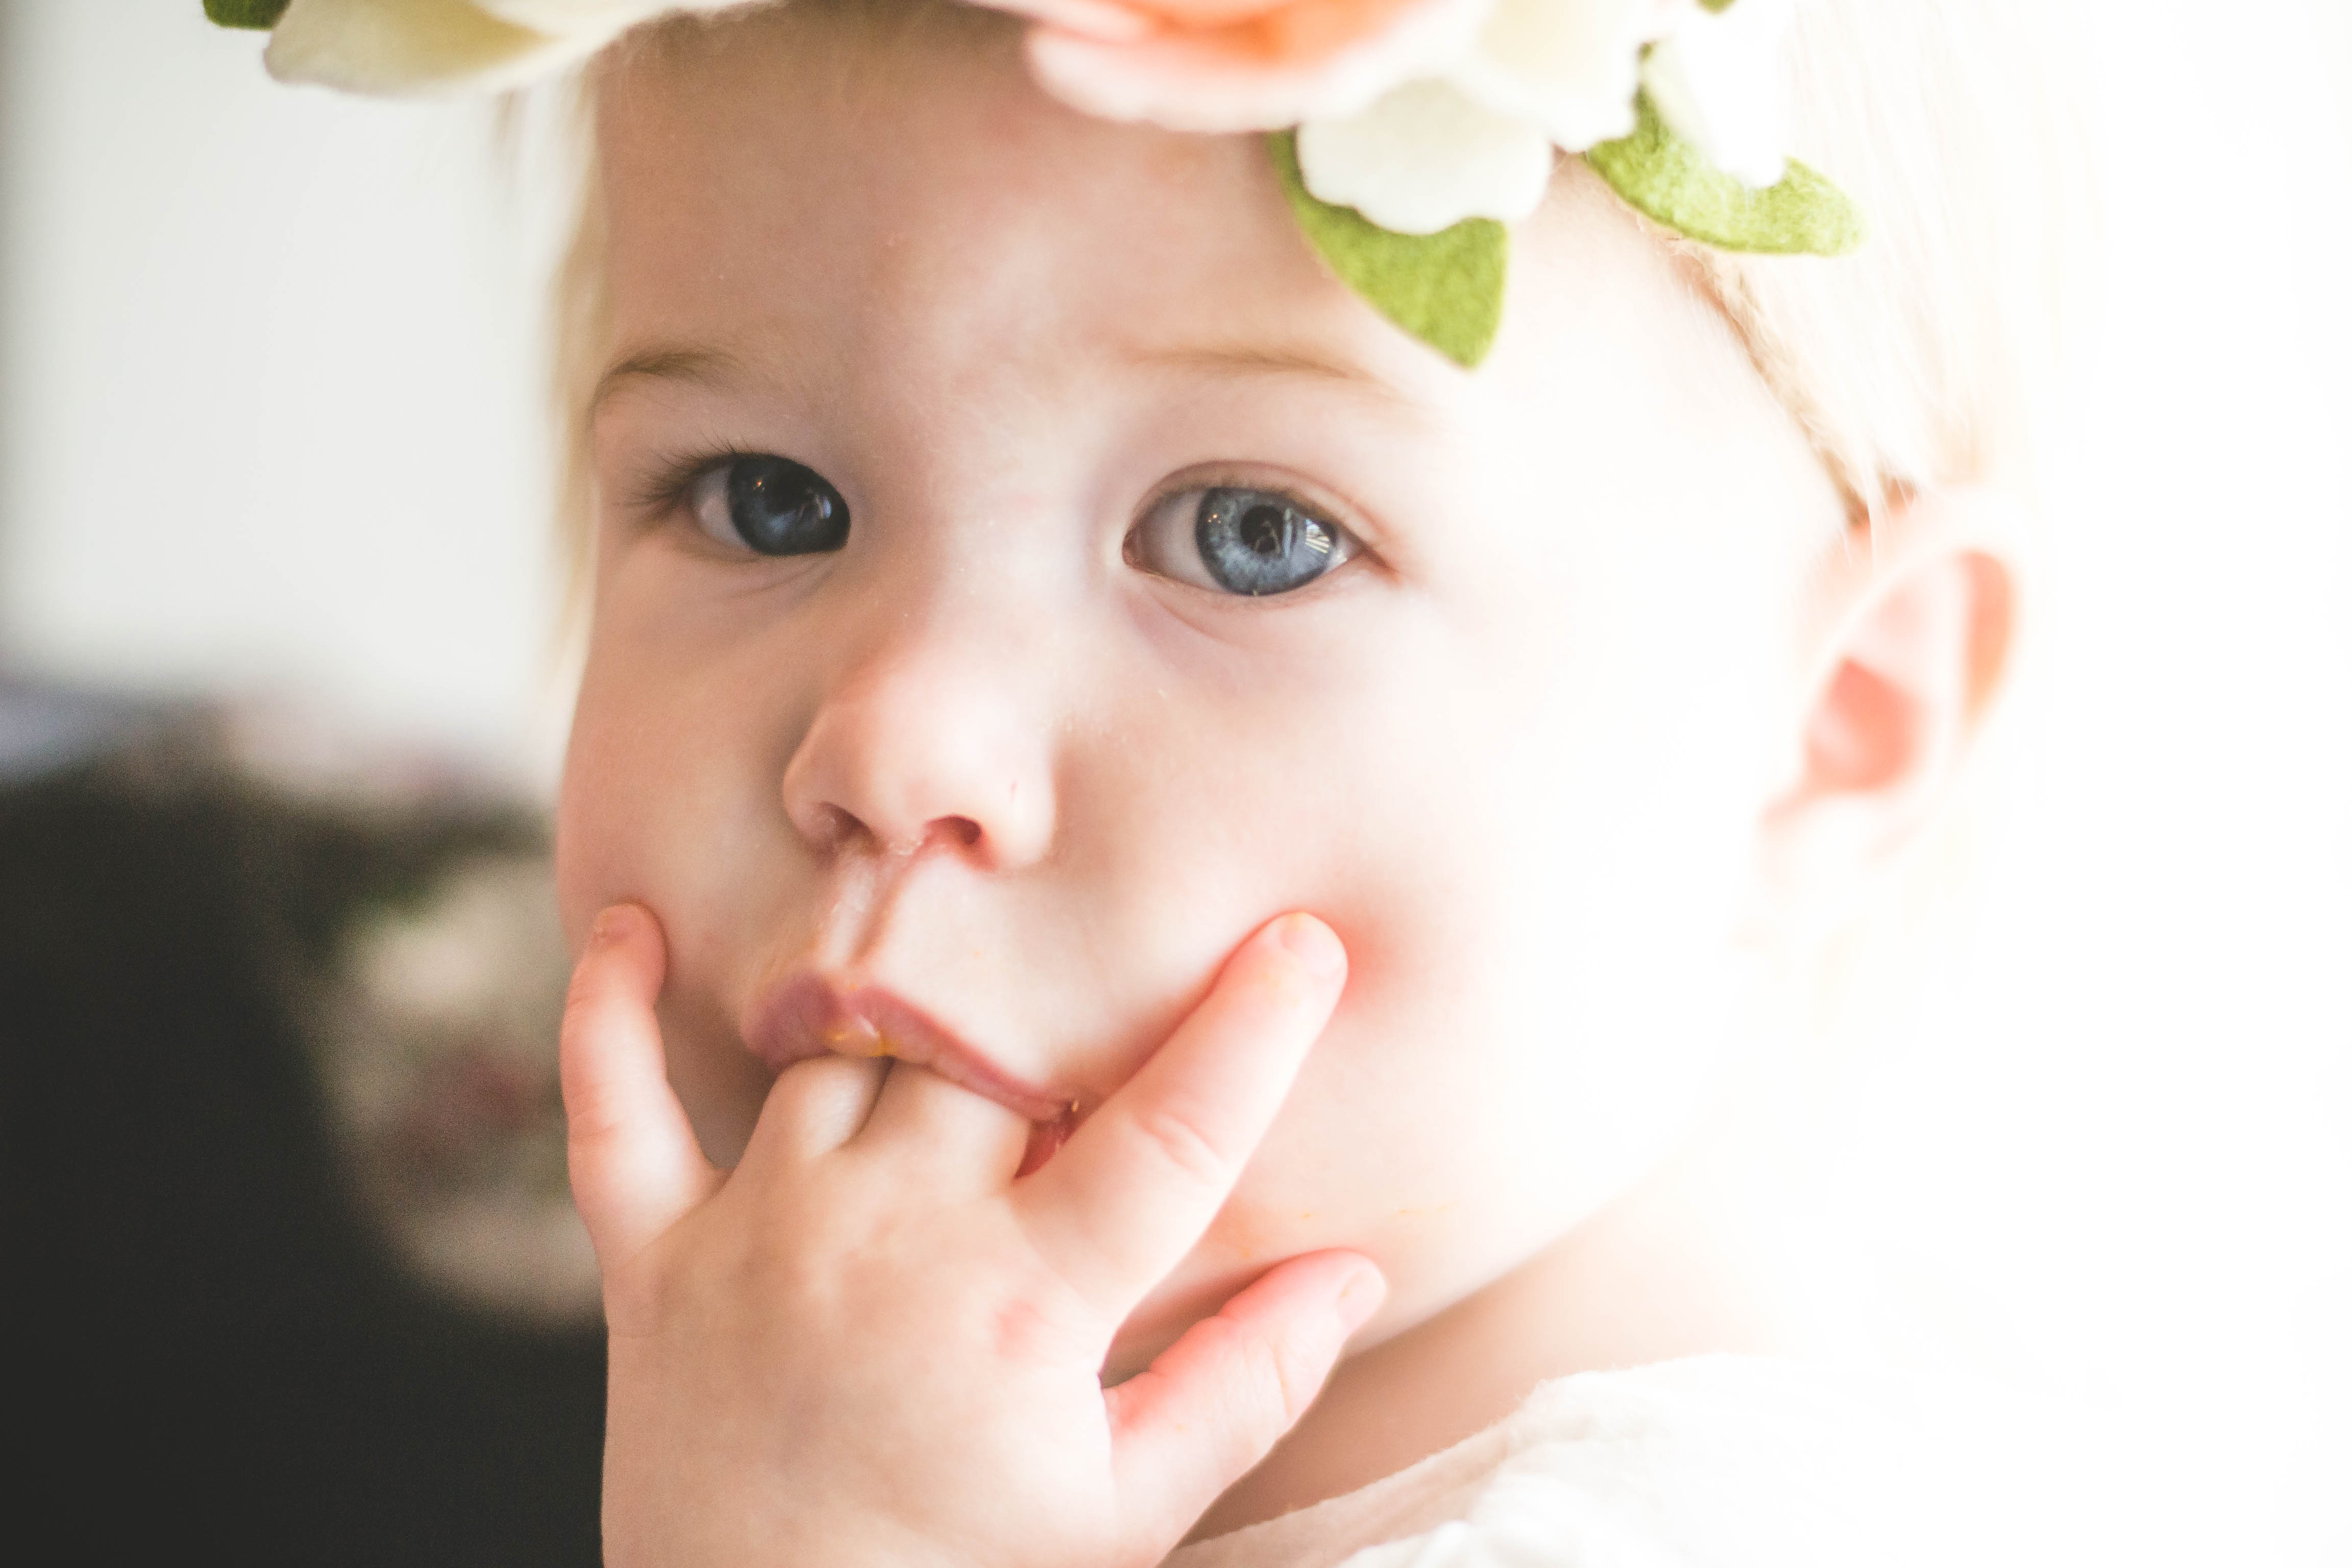 Close up photo of blonde baby girl wearing floral headband sucking fingers.